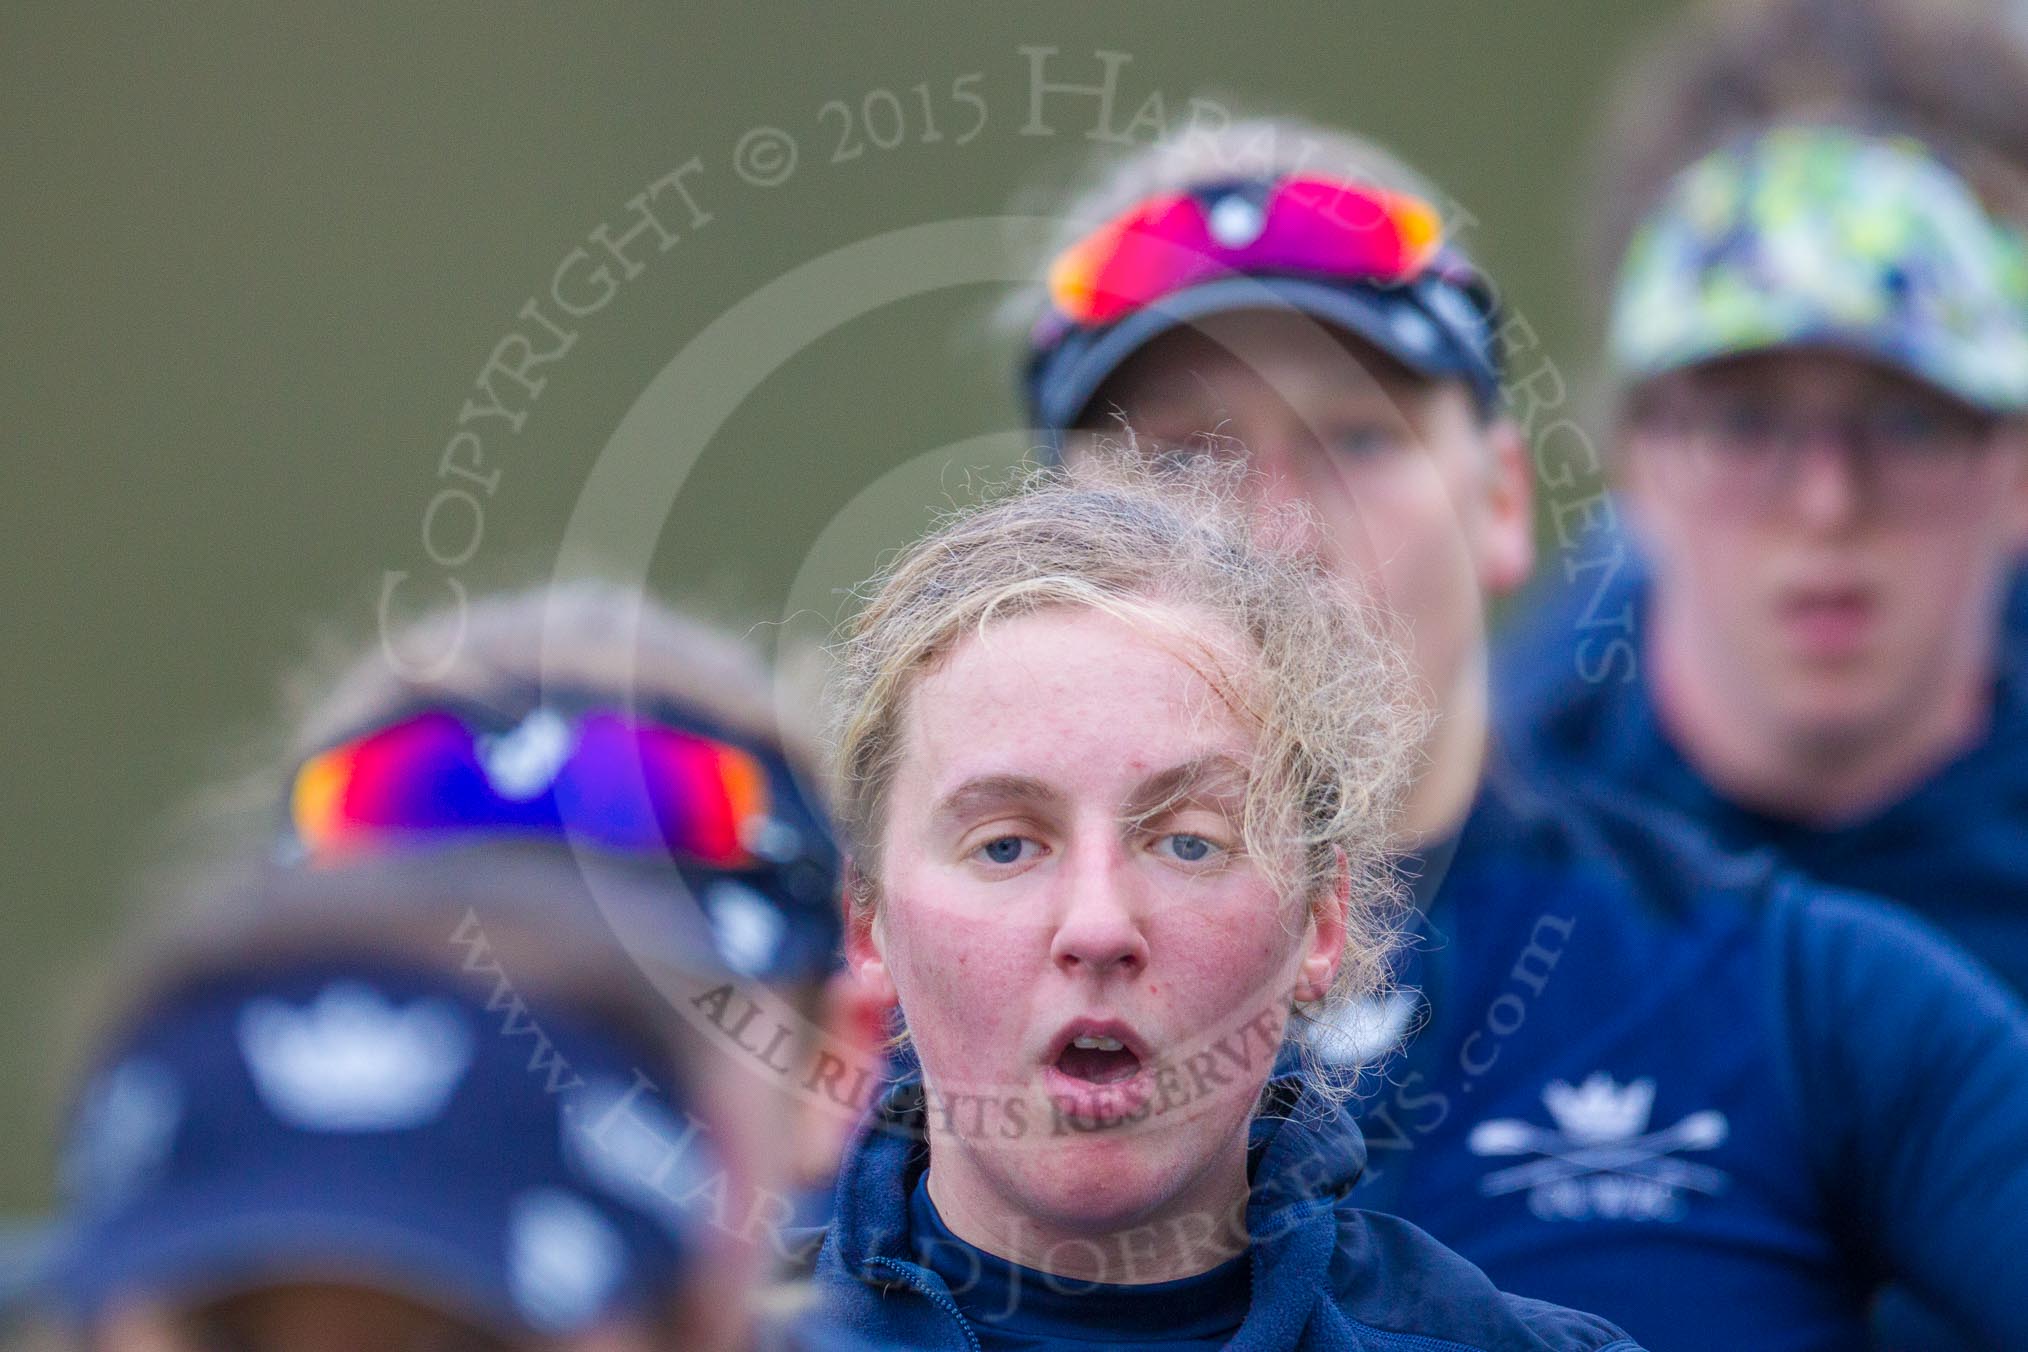 The Boat Race season 2016 - OUWBC training Wallingford: Anastasia Chitty, 6 seat in the OUWBC Blue Boat.
River Thames,
Wallingford,
Oxfordshire,

on 29 February 2016 at 16:33, image #137